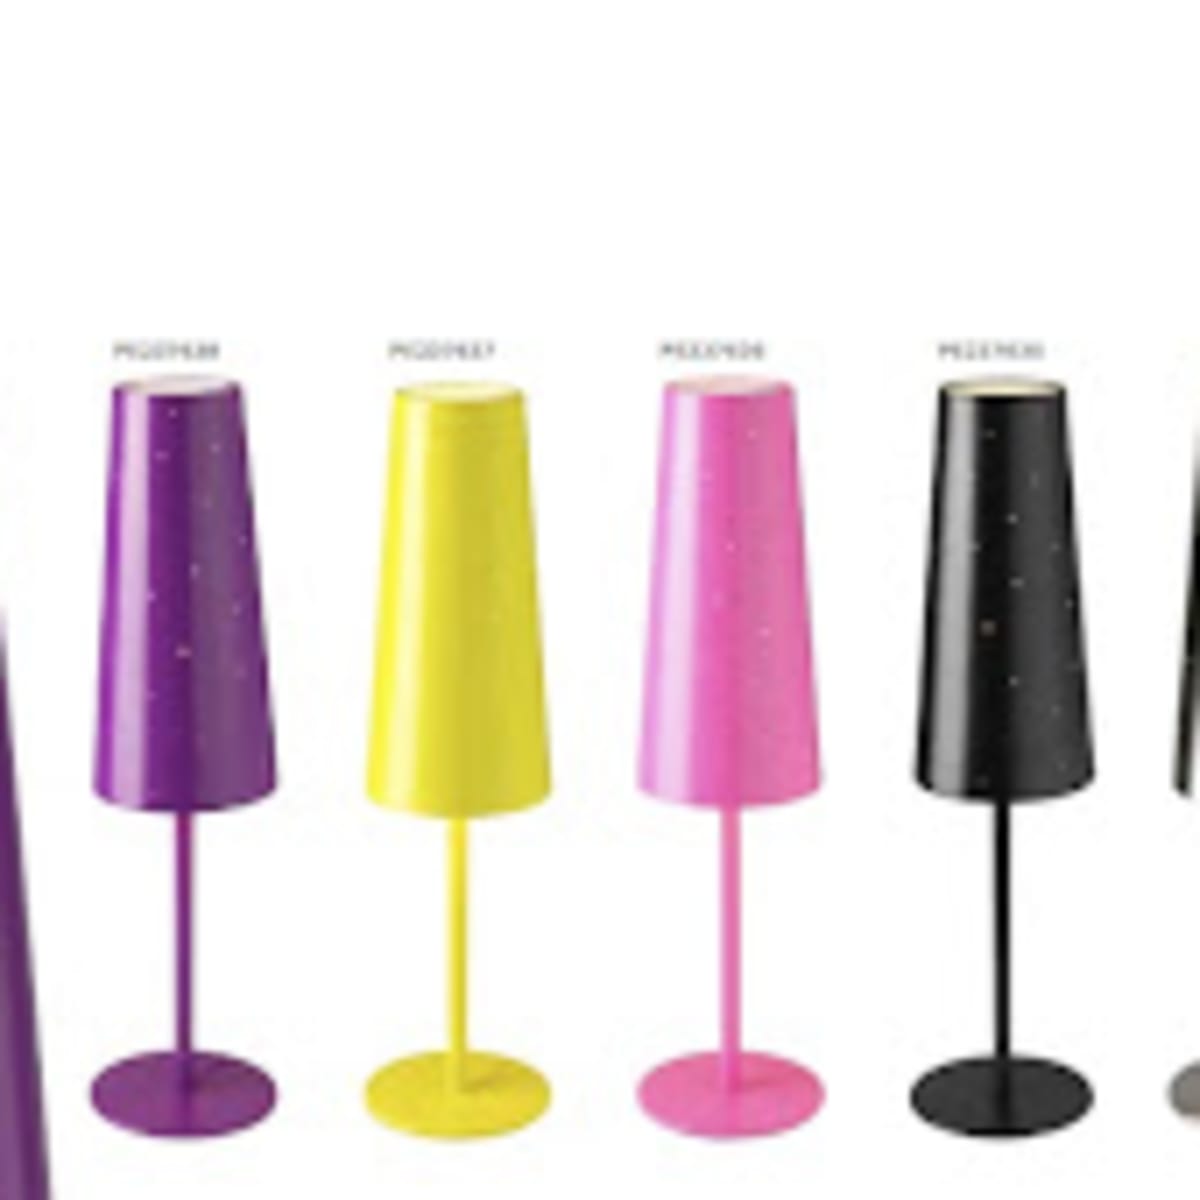 Colorful Table Lamps From Ikea Momtrends, Ikea Copper Table Lamp